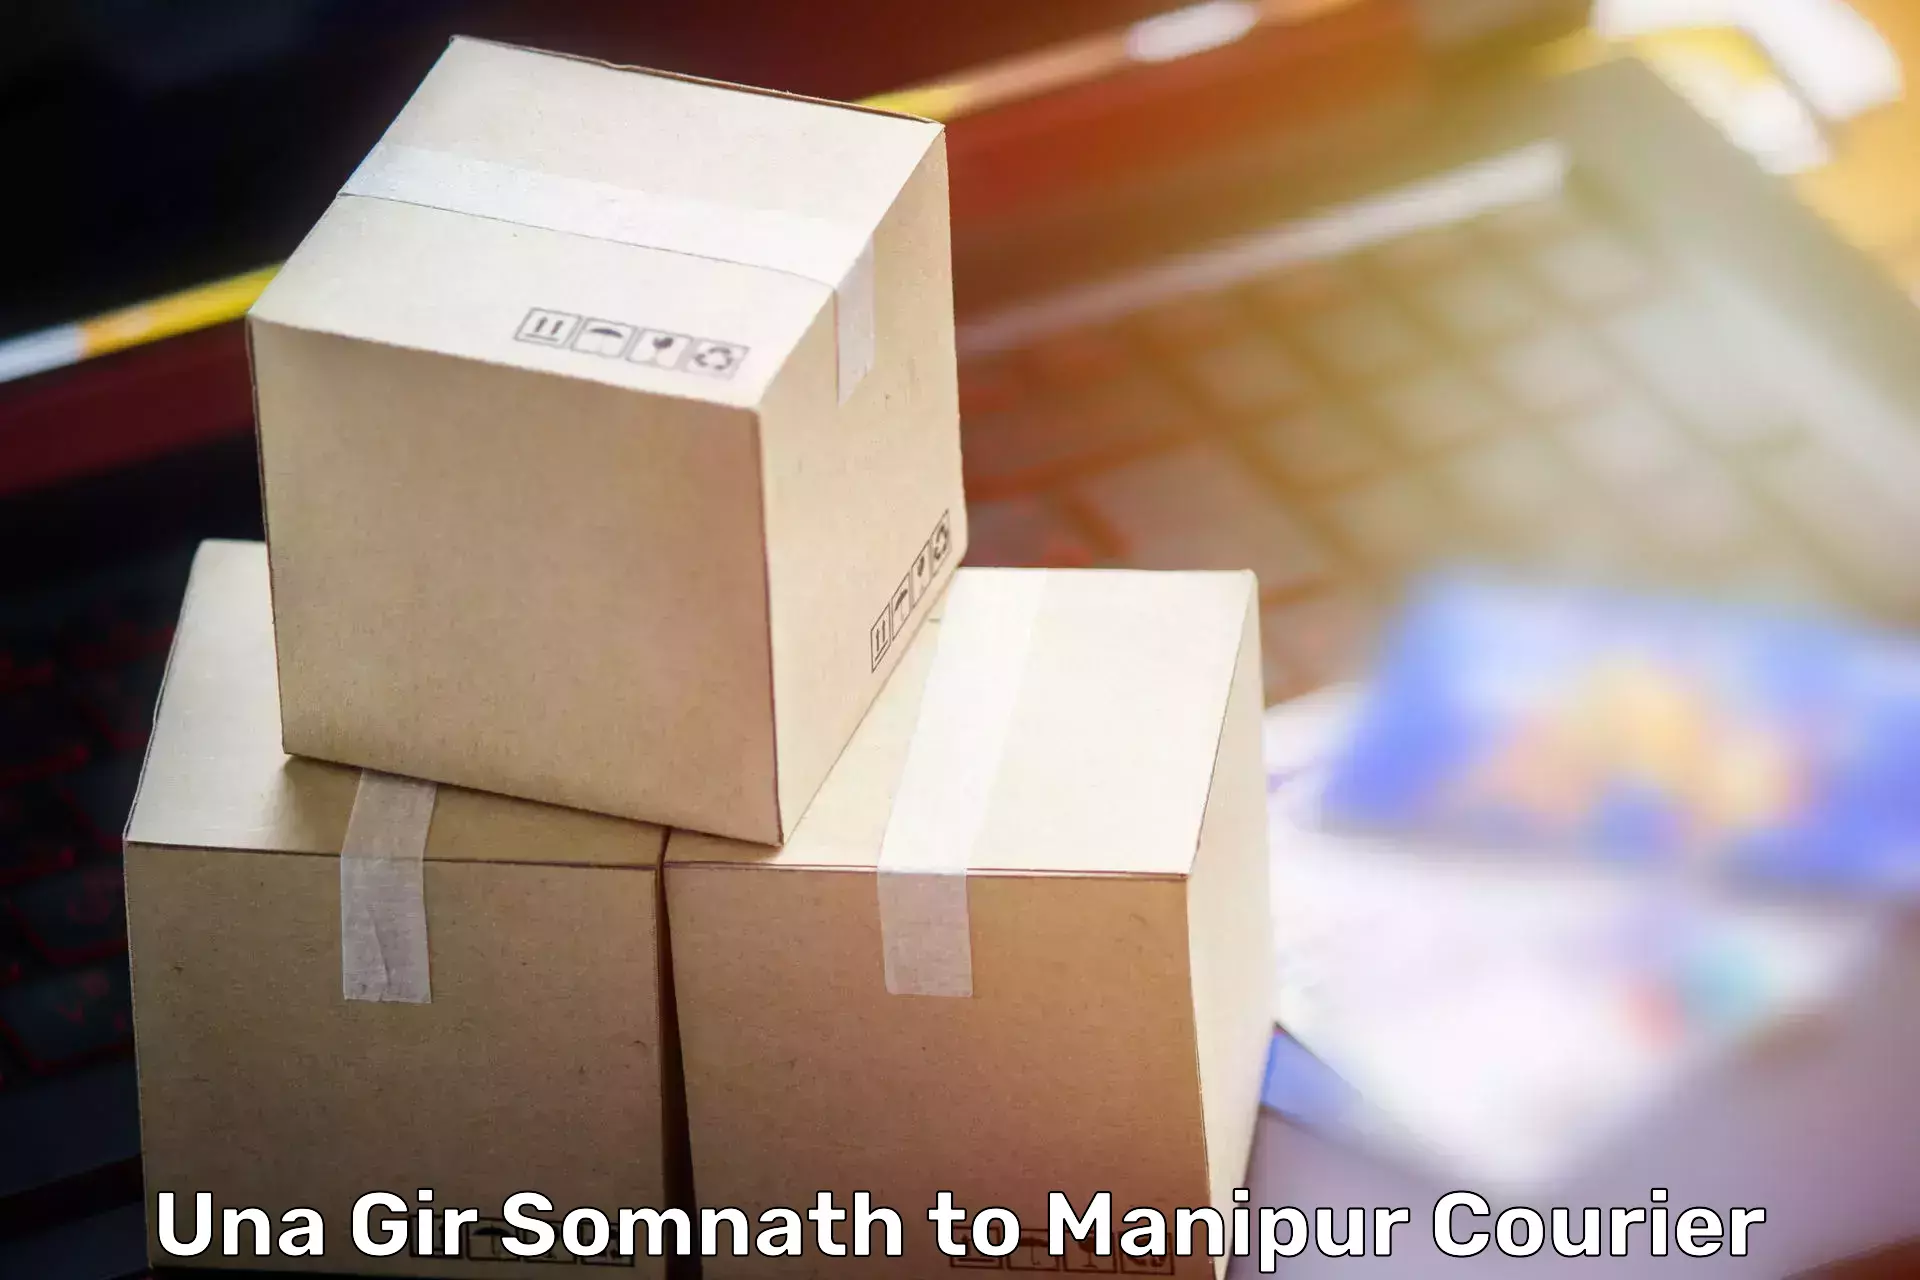 Furniture moving specialists Una Gir Somnath to Manipur